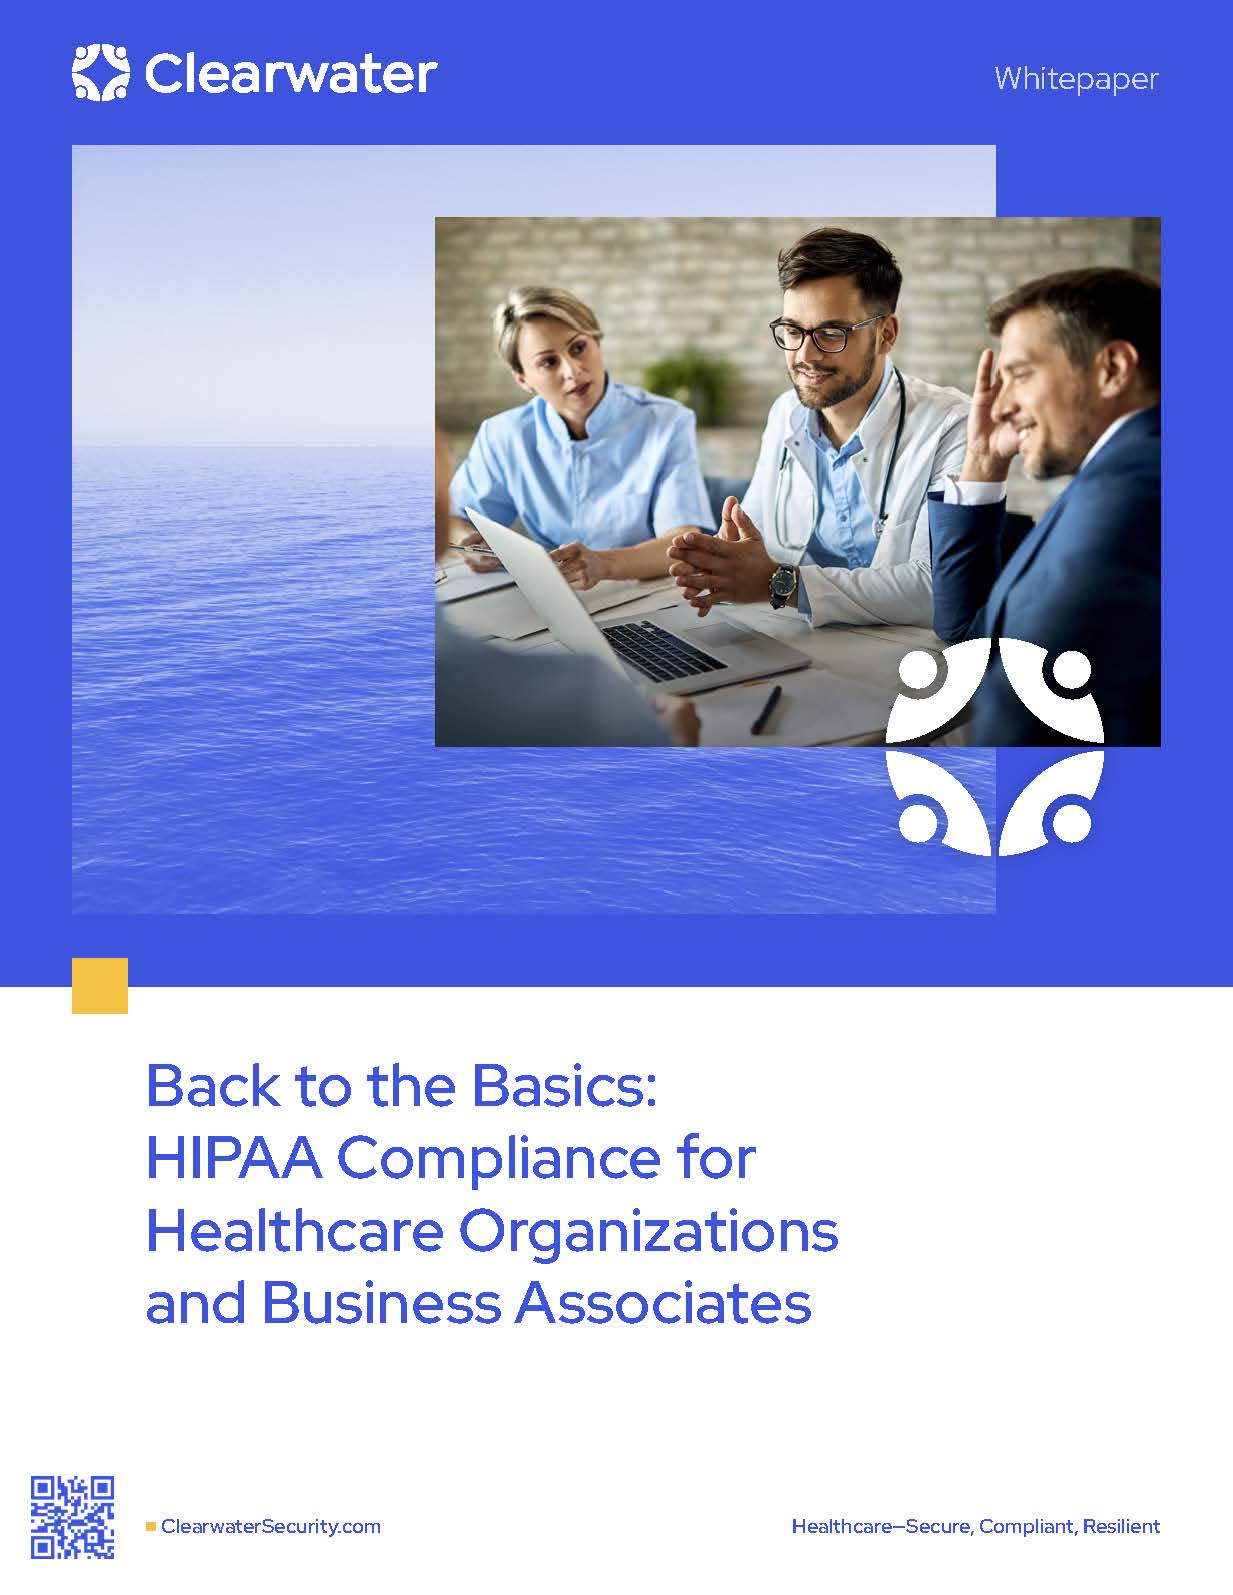 HIPAA Compliance for Healthcare Organizations and Business Associates by Clearwater